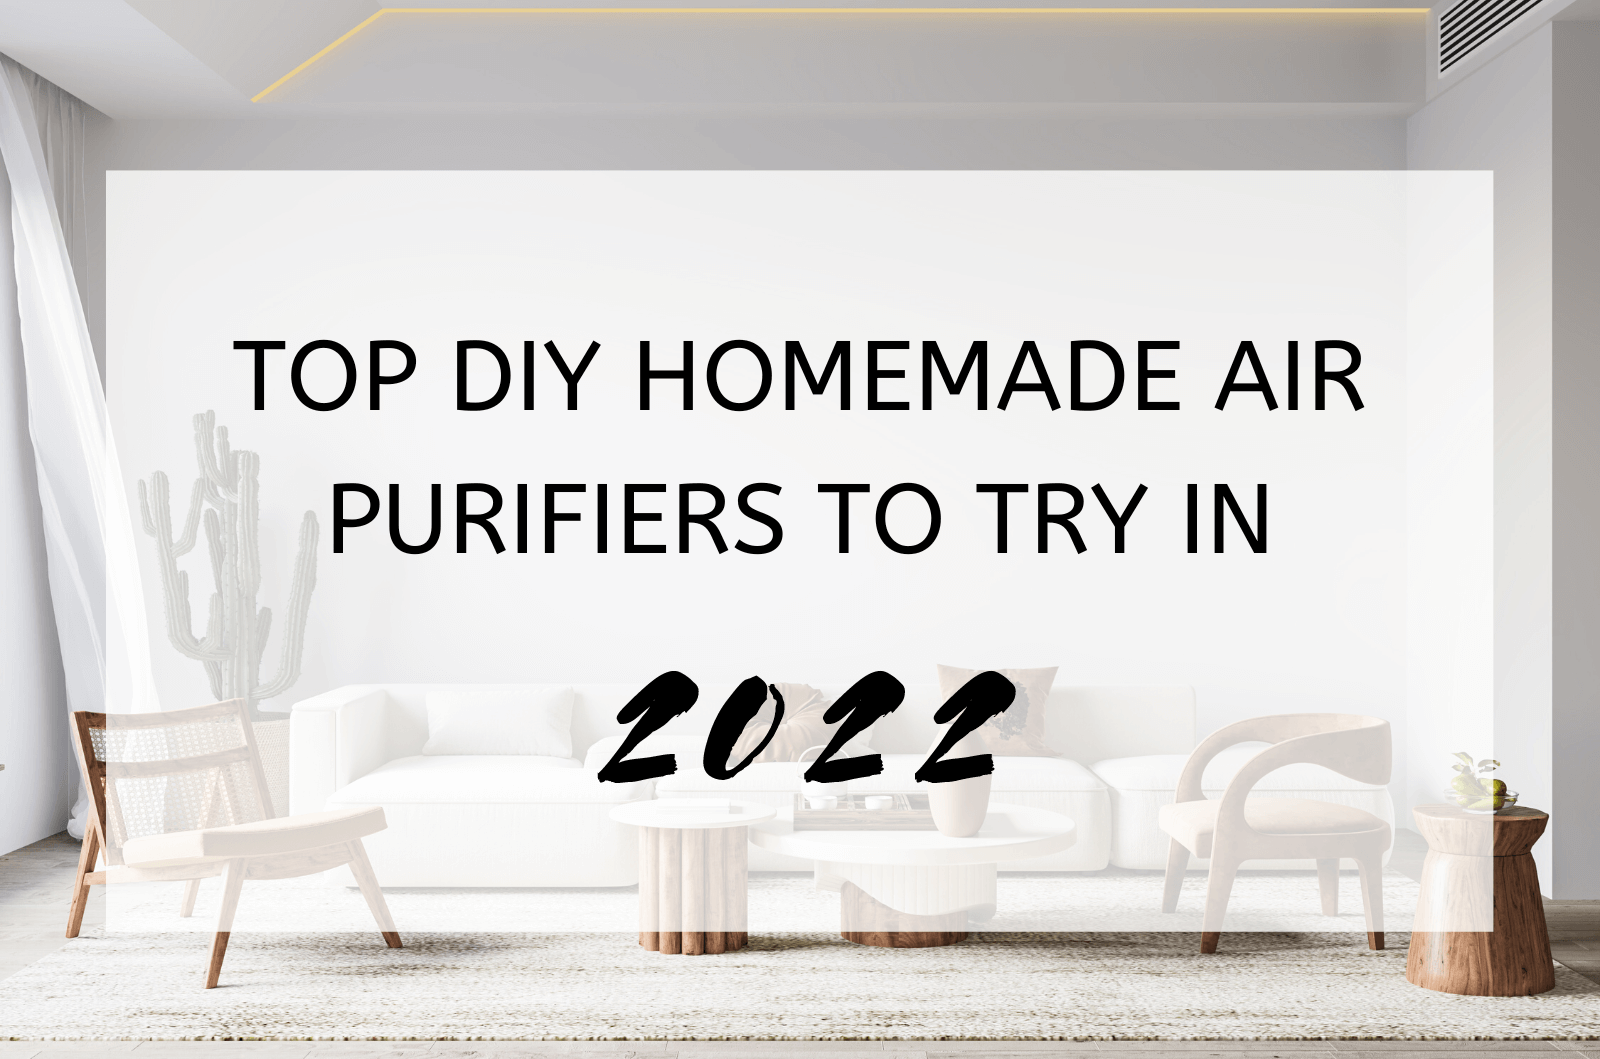 Top Diy Homemade Air Purifiers To Try In 2022